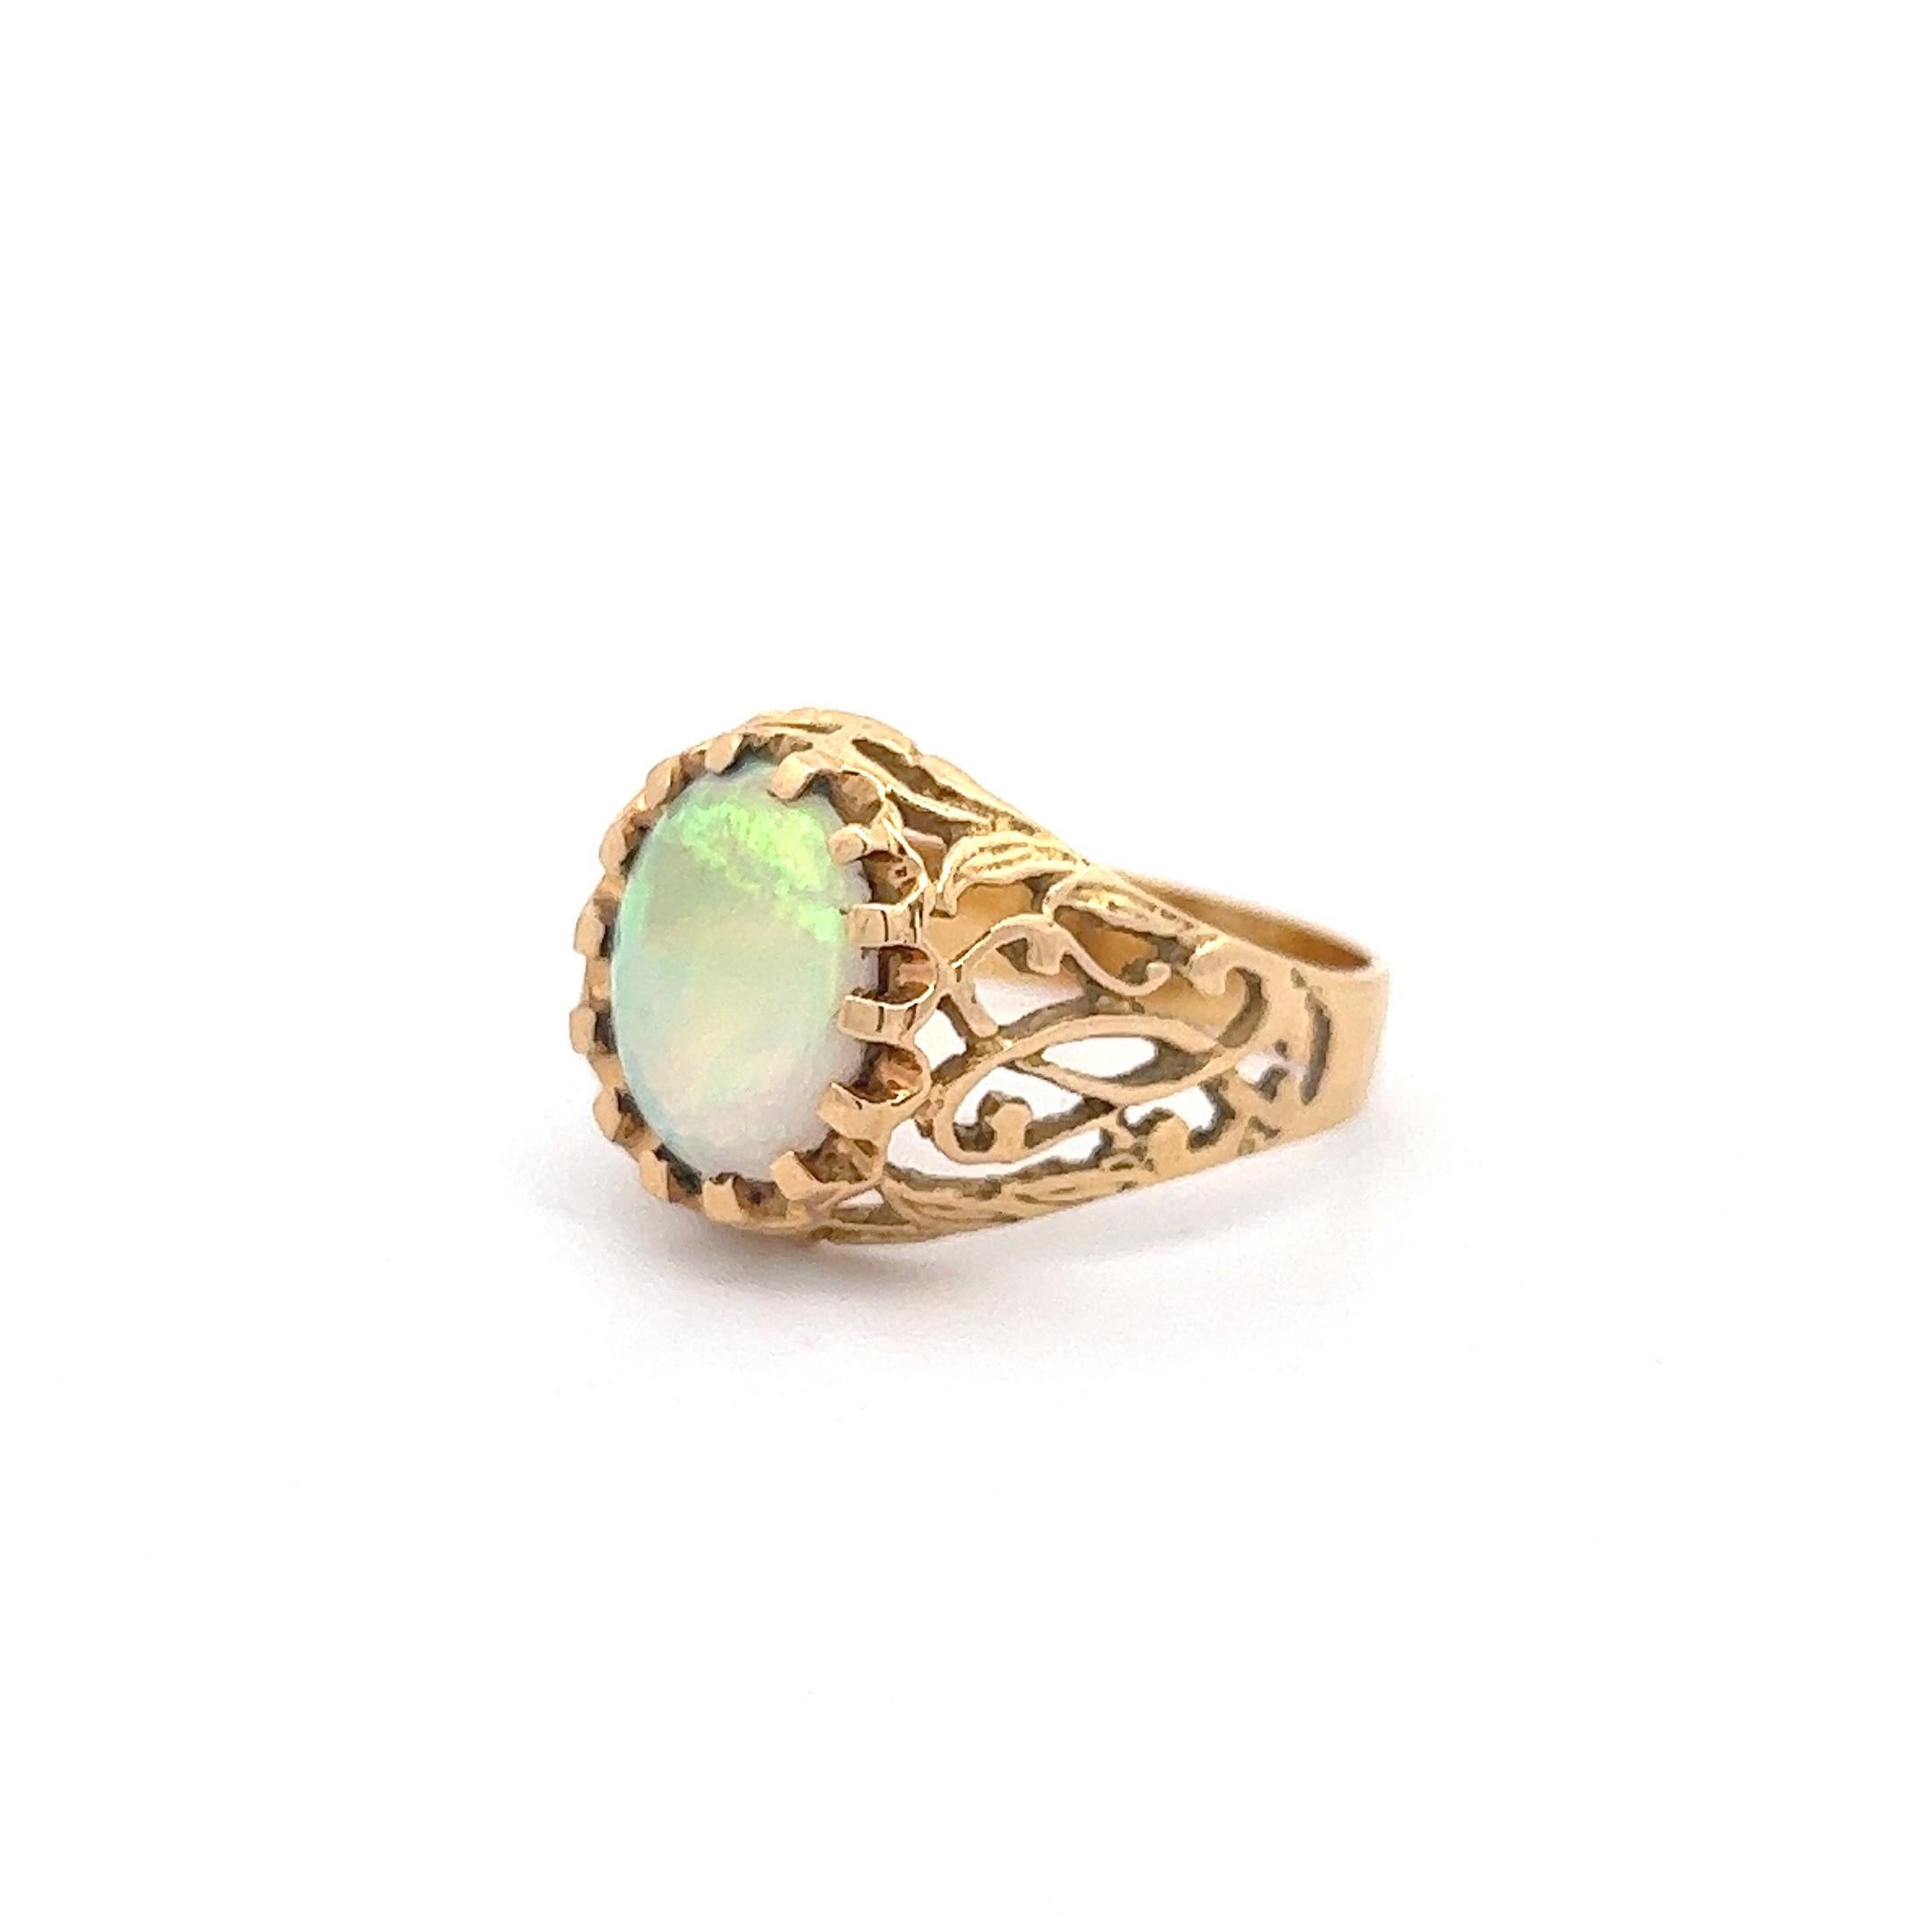 An exceptional opal with wonderful fire proudly set in a brutalist-era 14k yellow gold ring, size 8. The opal is of Australian origin and weighs approximately 1.11 carats (measured in setting). The ring shows minor signs of wear on the shank in the